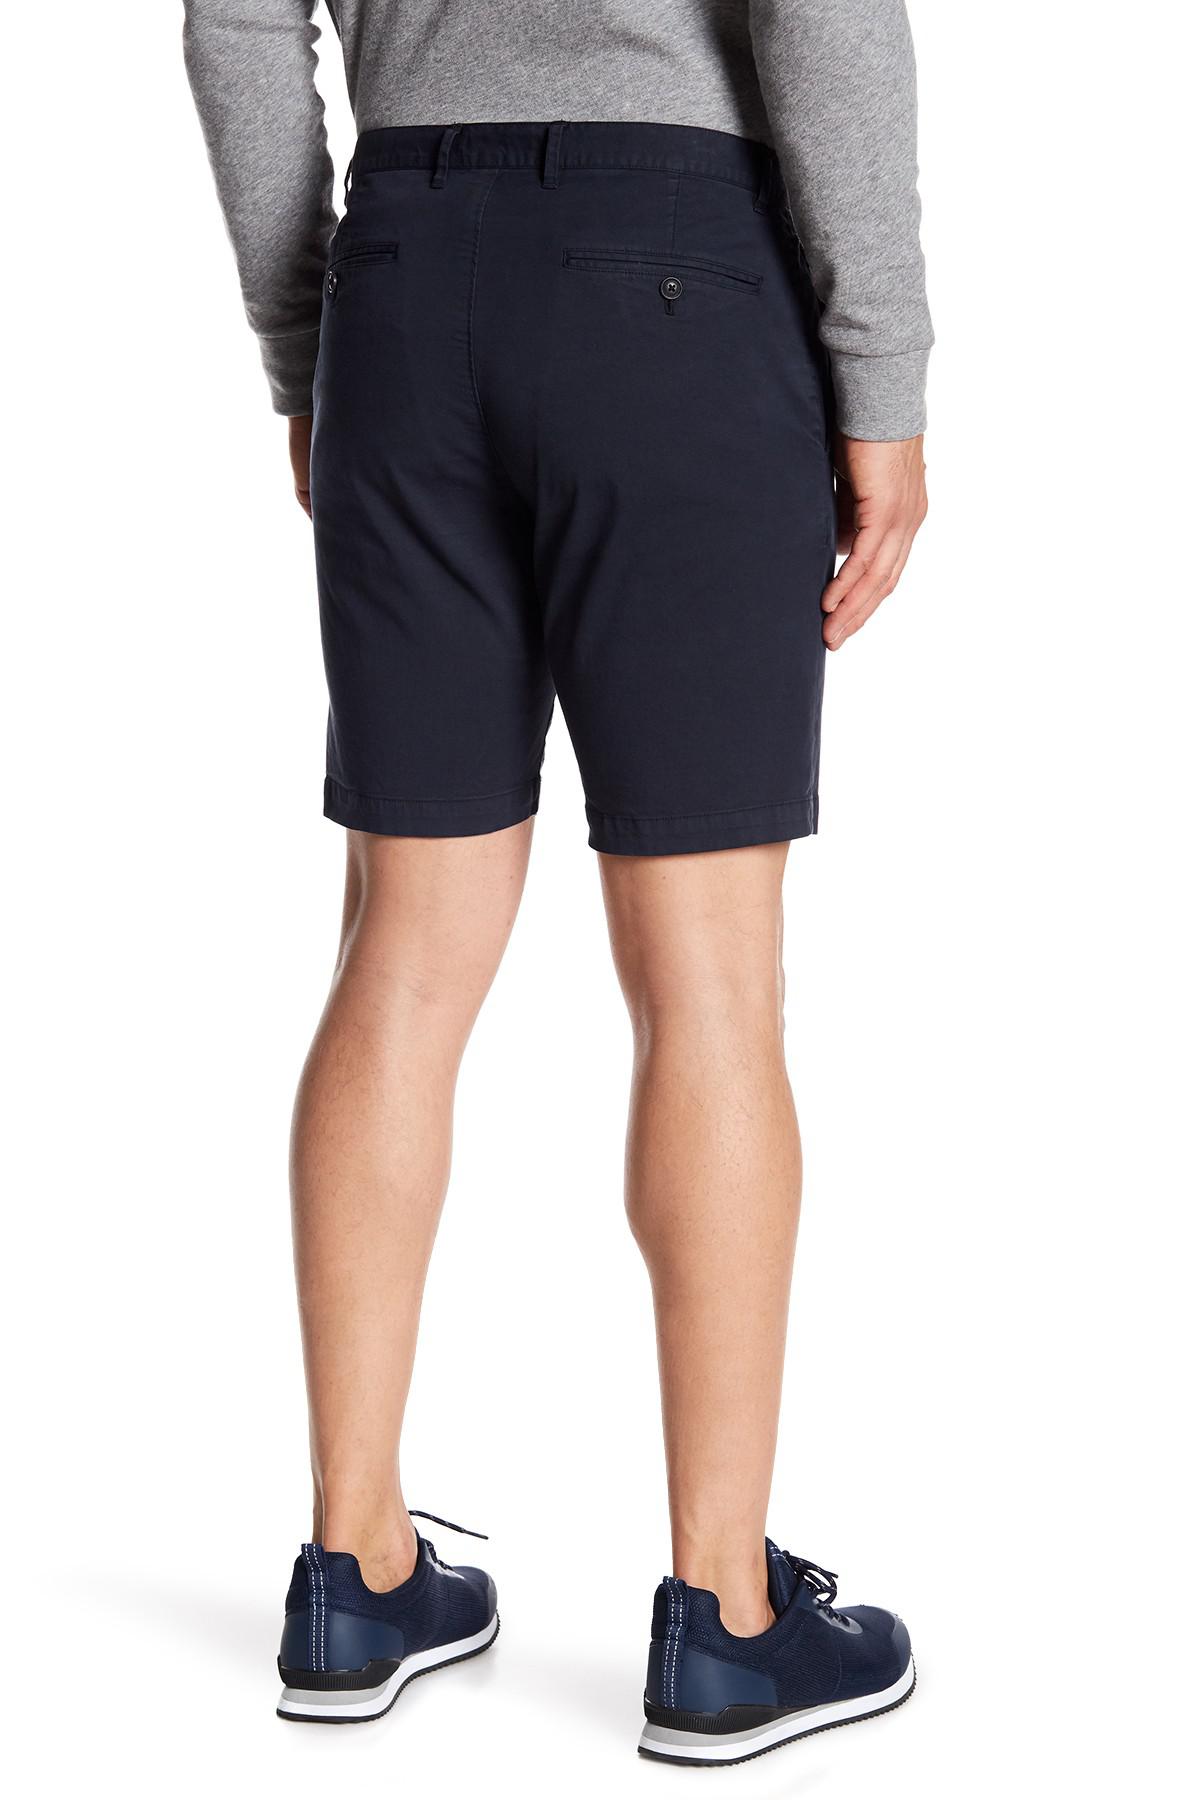 Theory Cotton Zaine Shorts in Blue for Men - Lyst